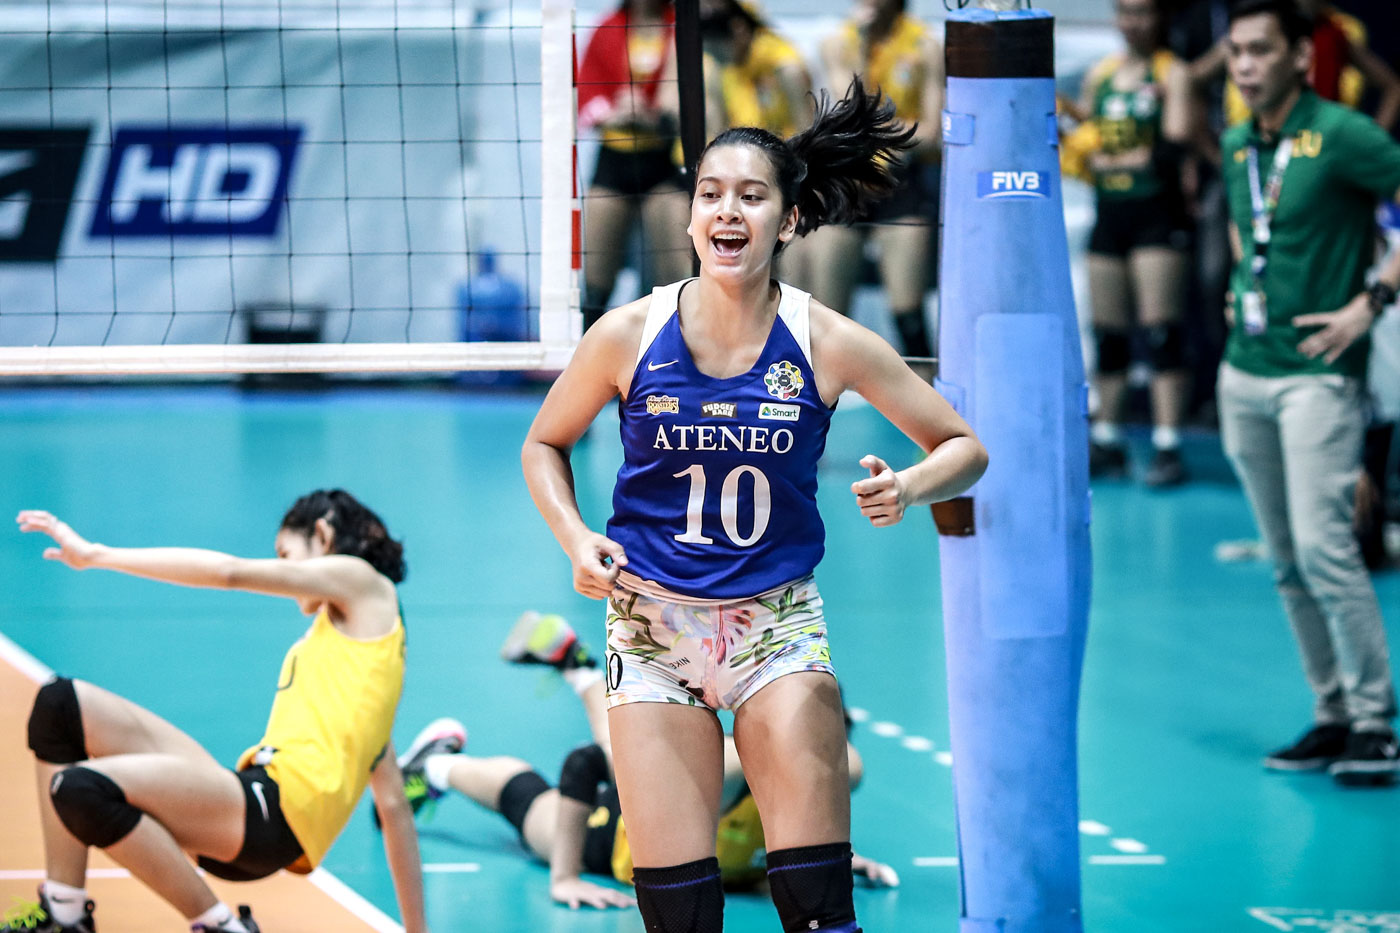 Get to watch UAAP volleyball live for as low as P35